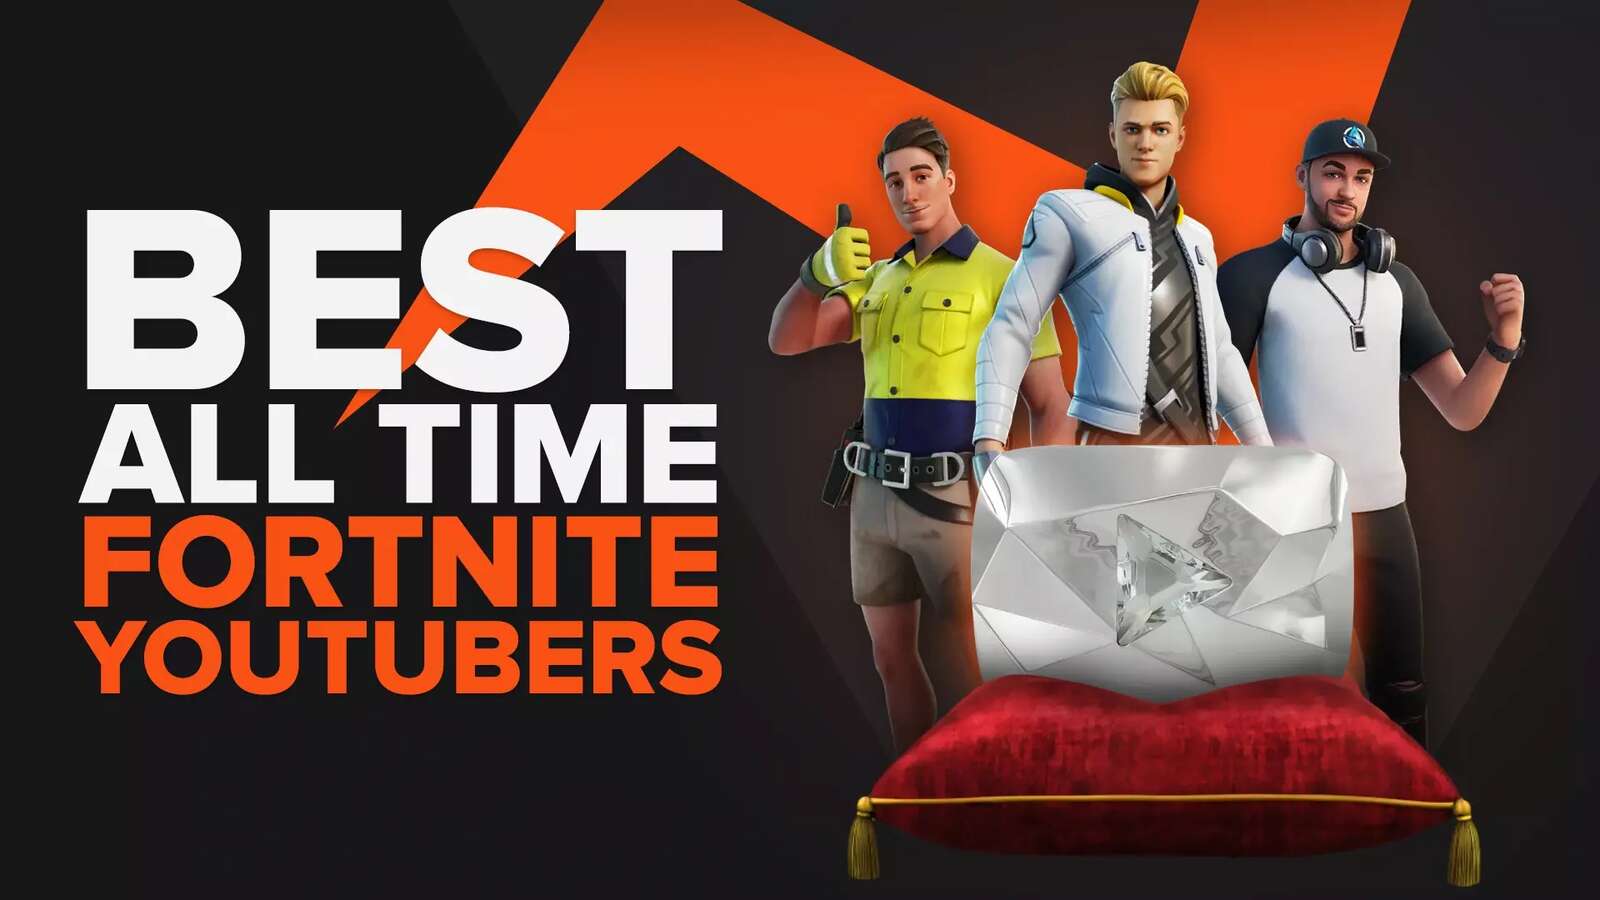 The 7 Best Fortnite YouTubers of All Time